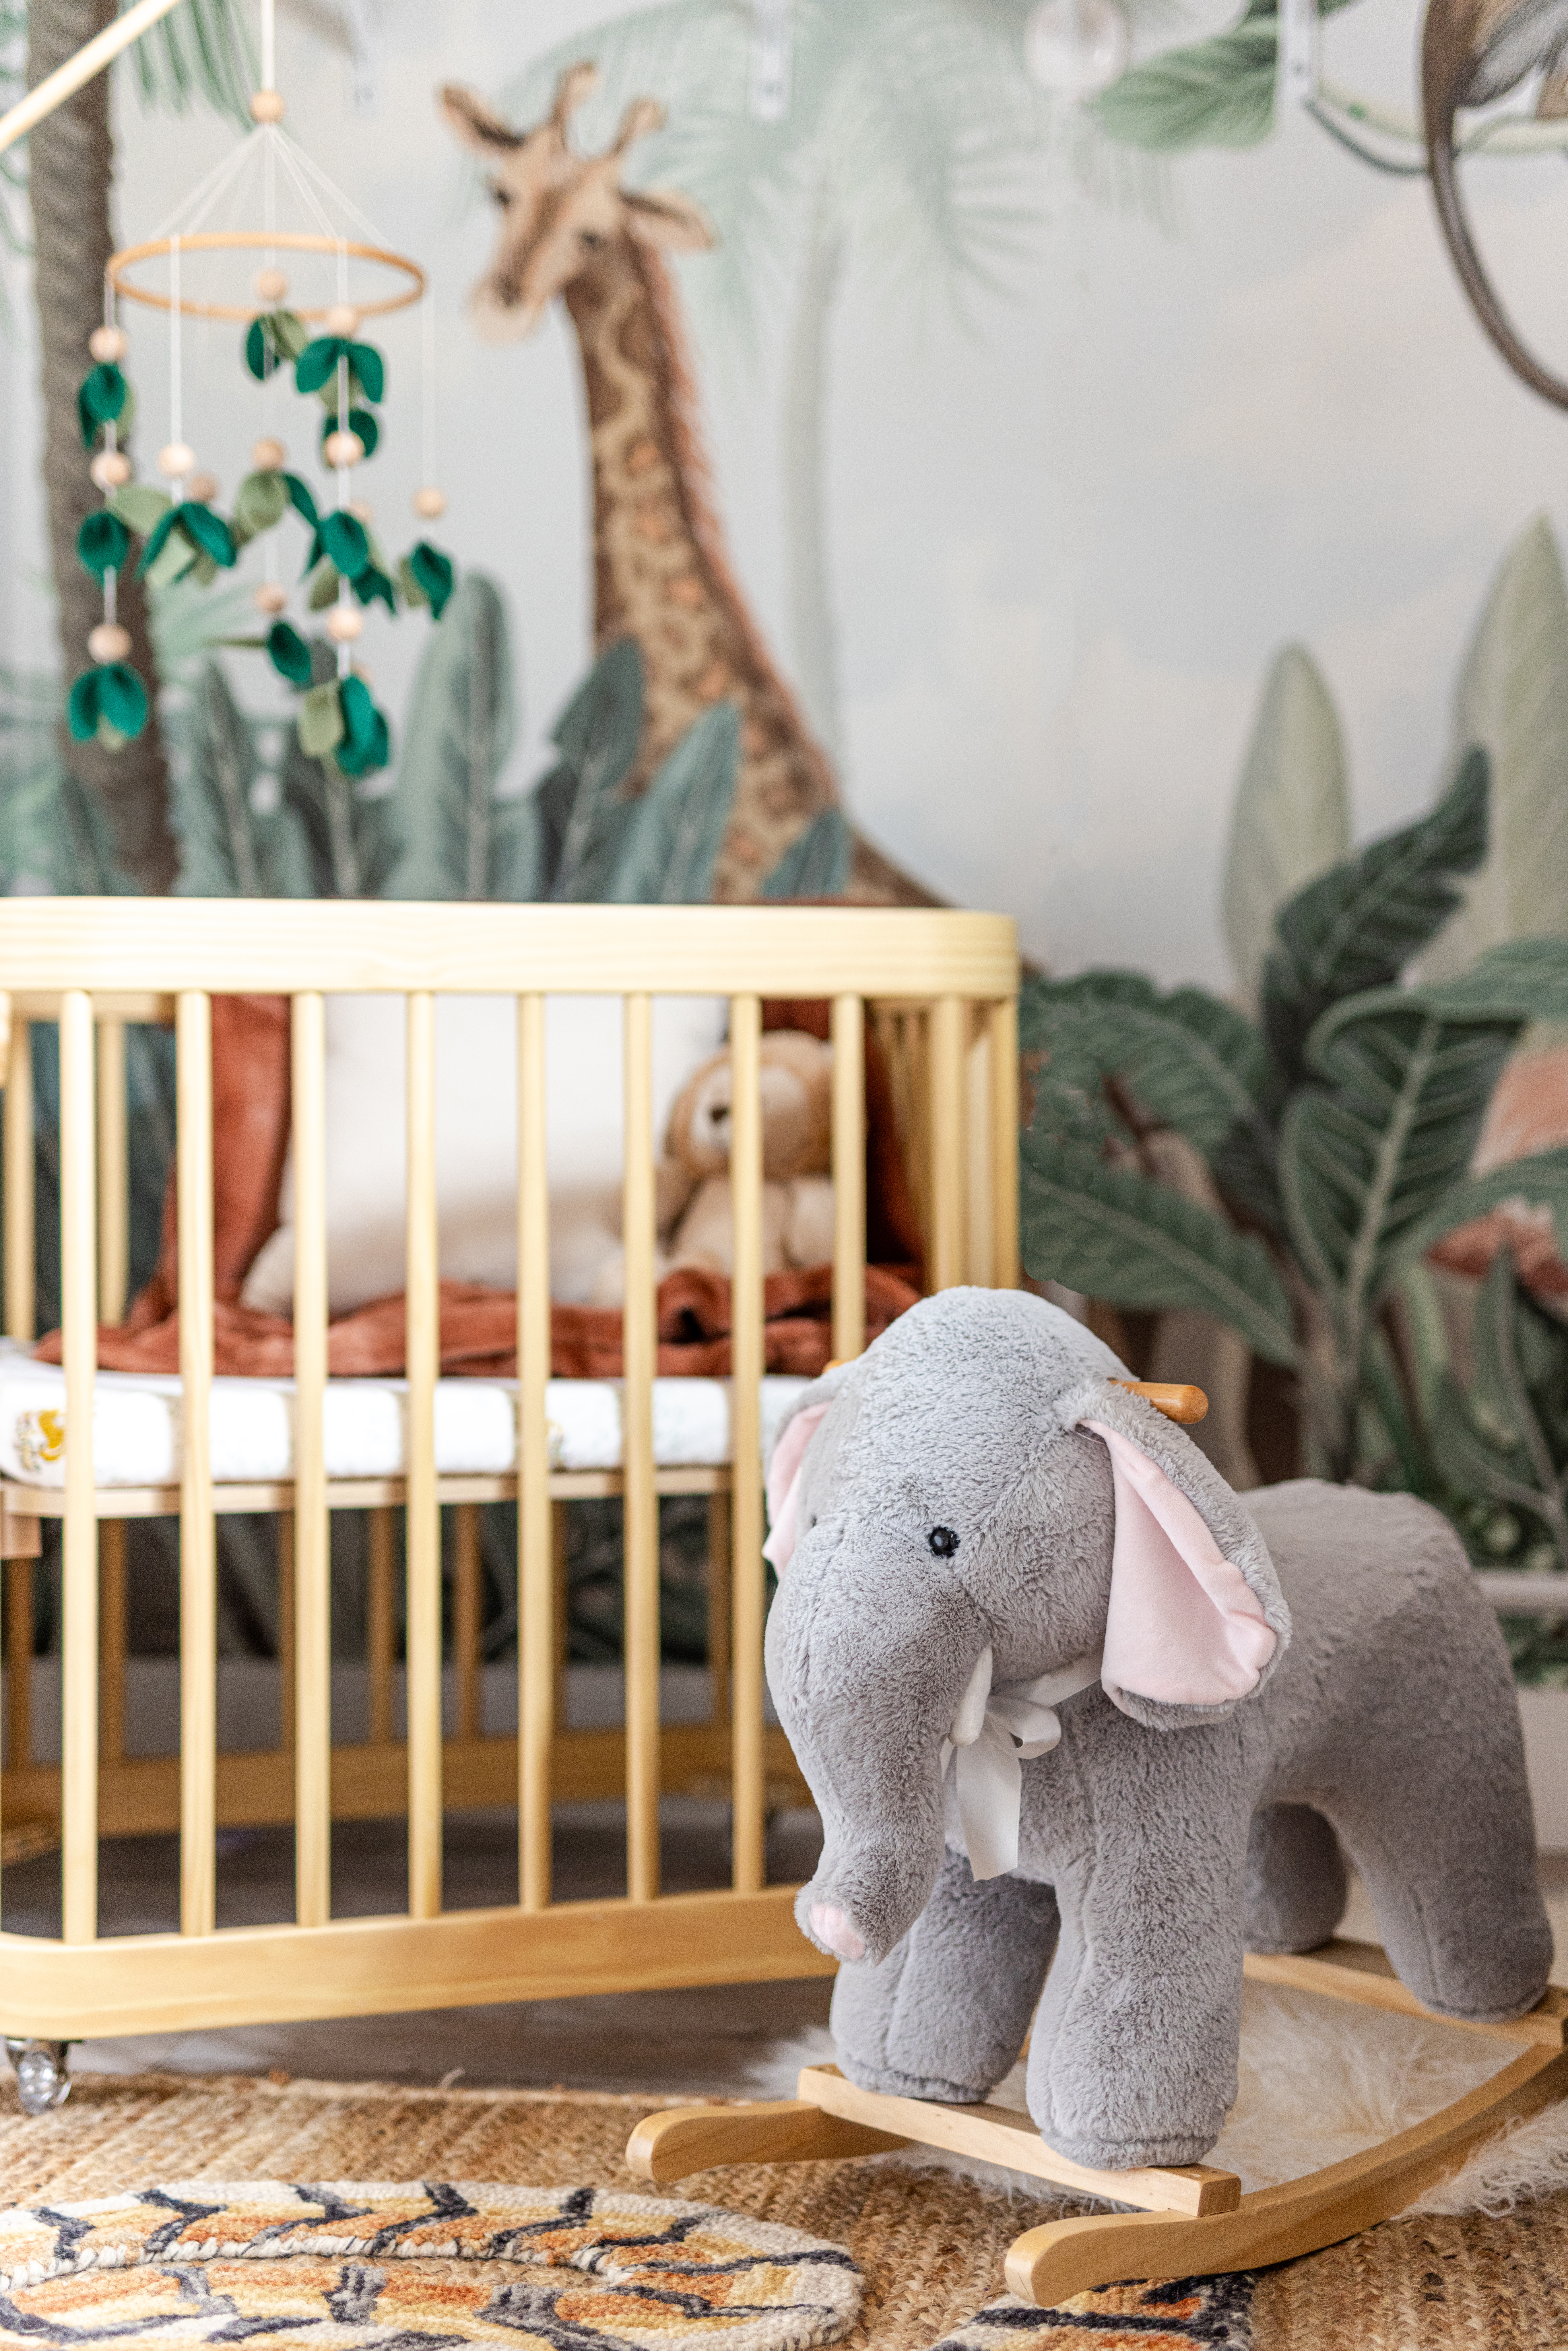 Small Space, Big Impact: 5 Tips for Designing a Multi-Functional Nursery